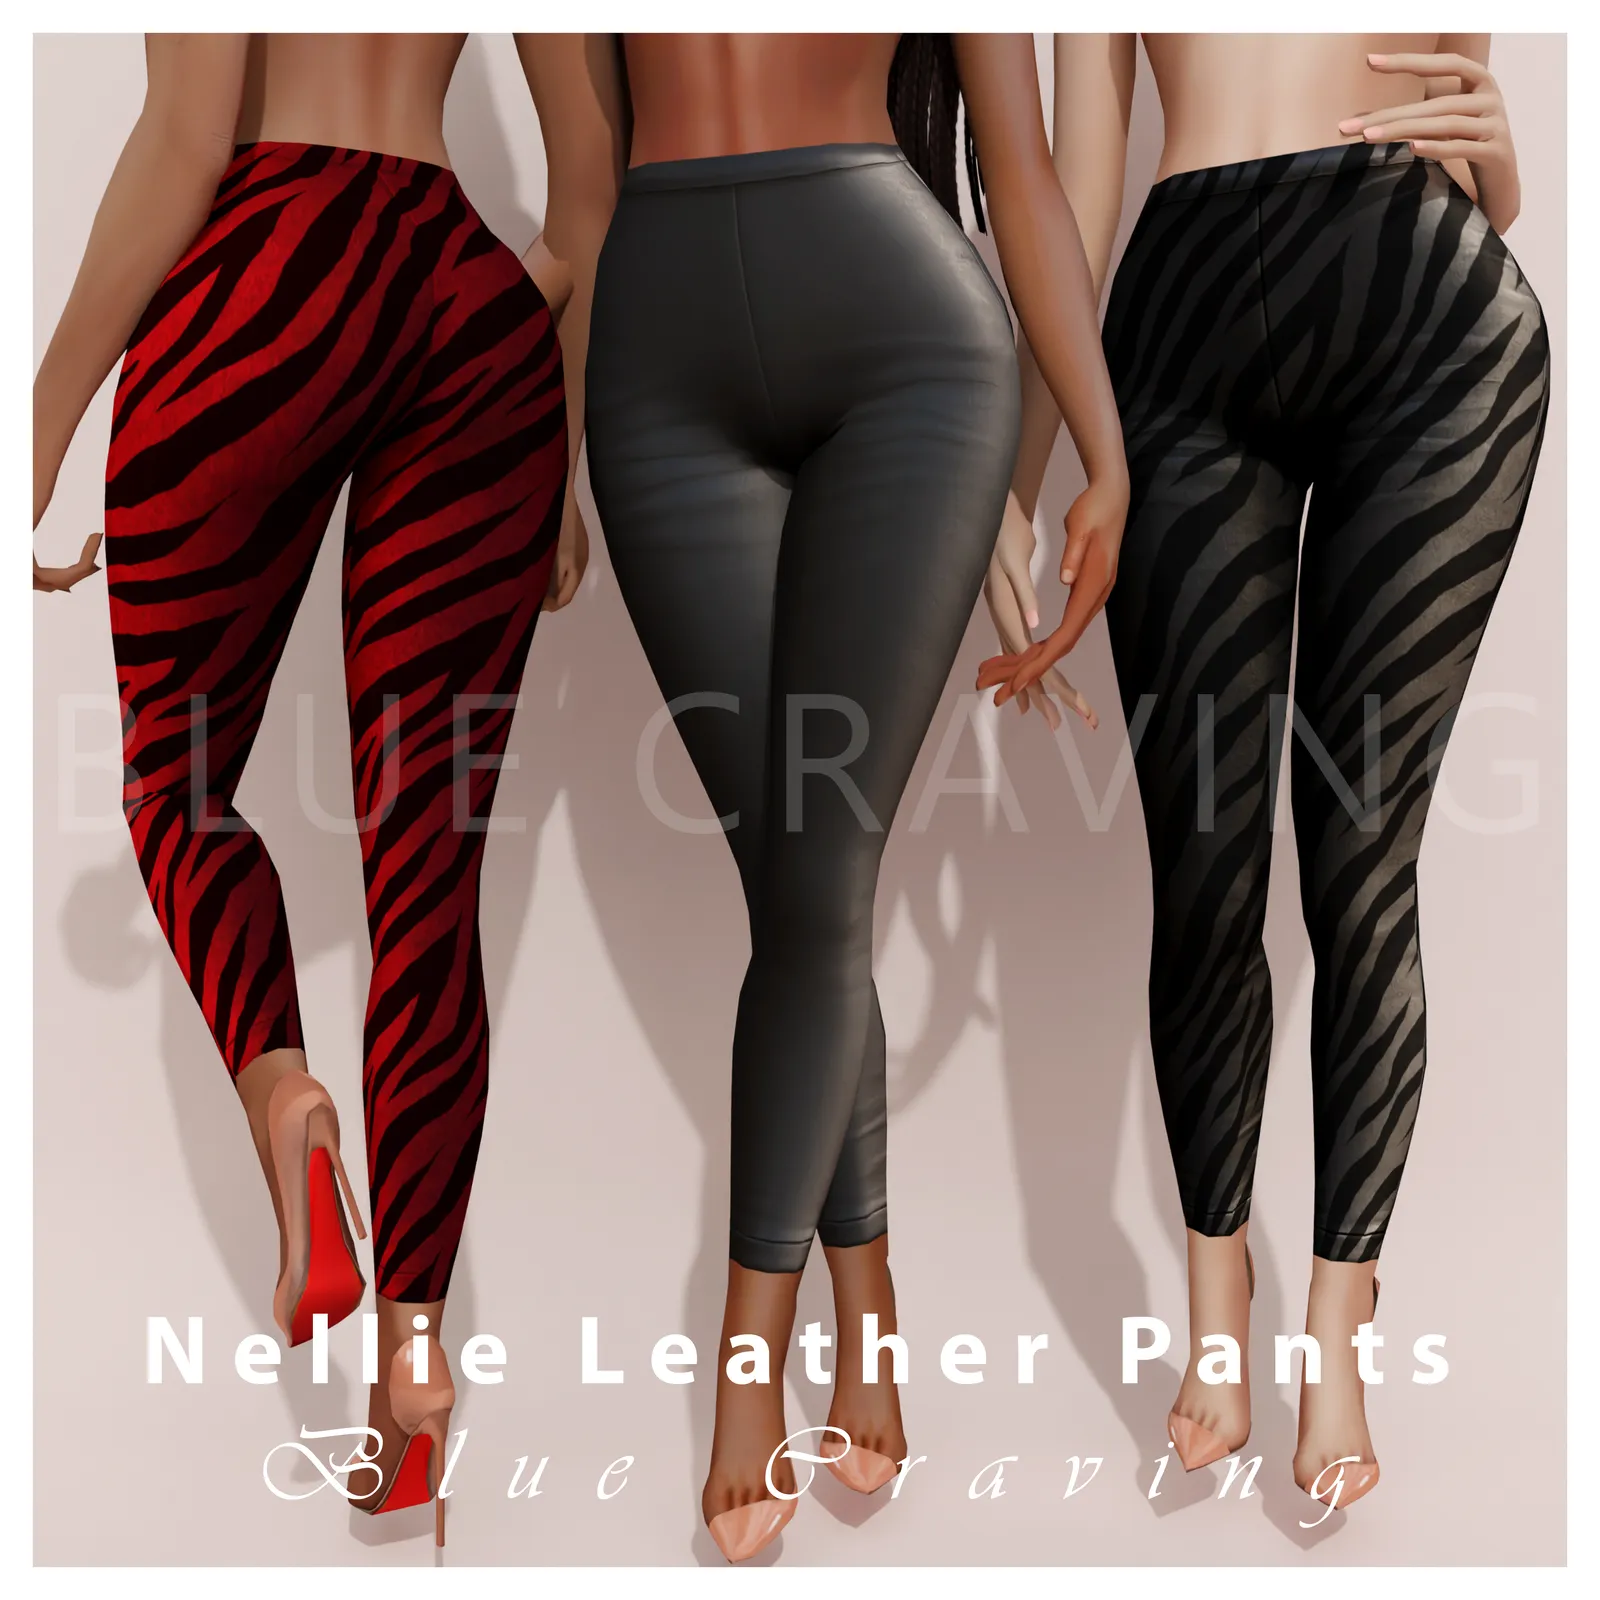 Nellie Leather Pants